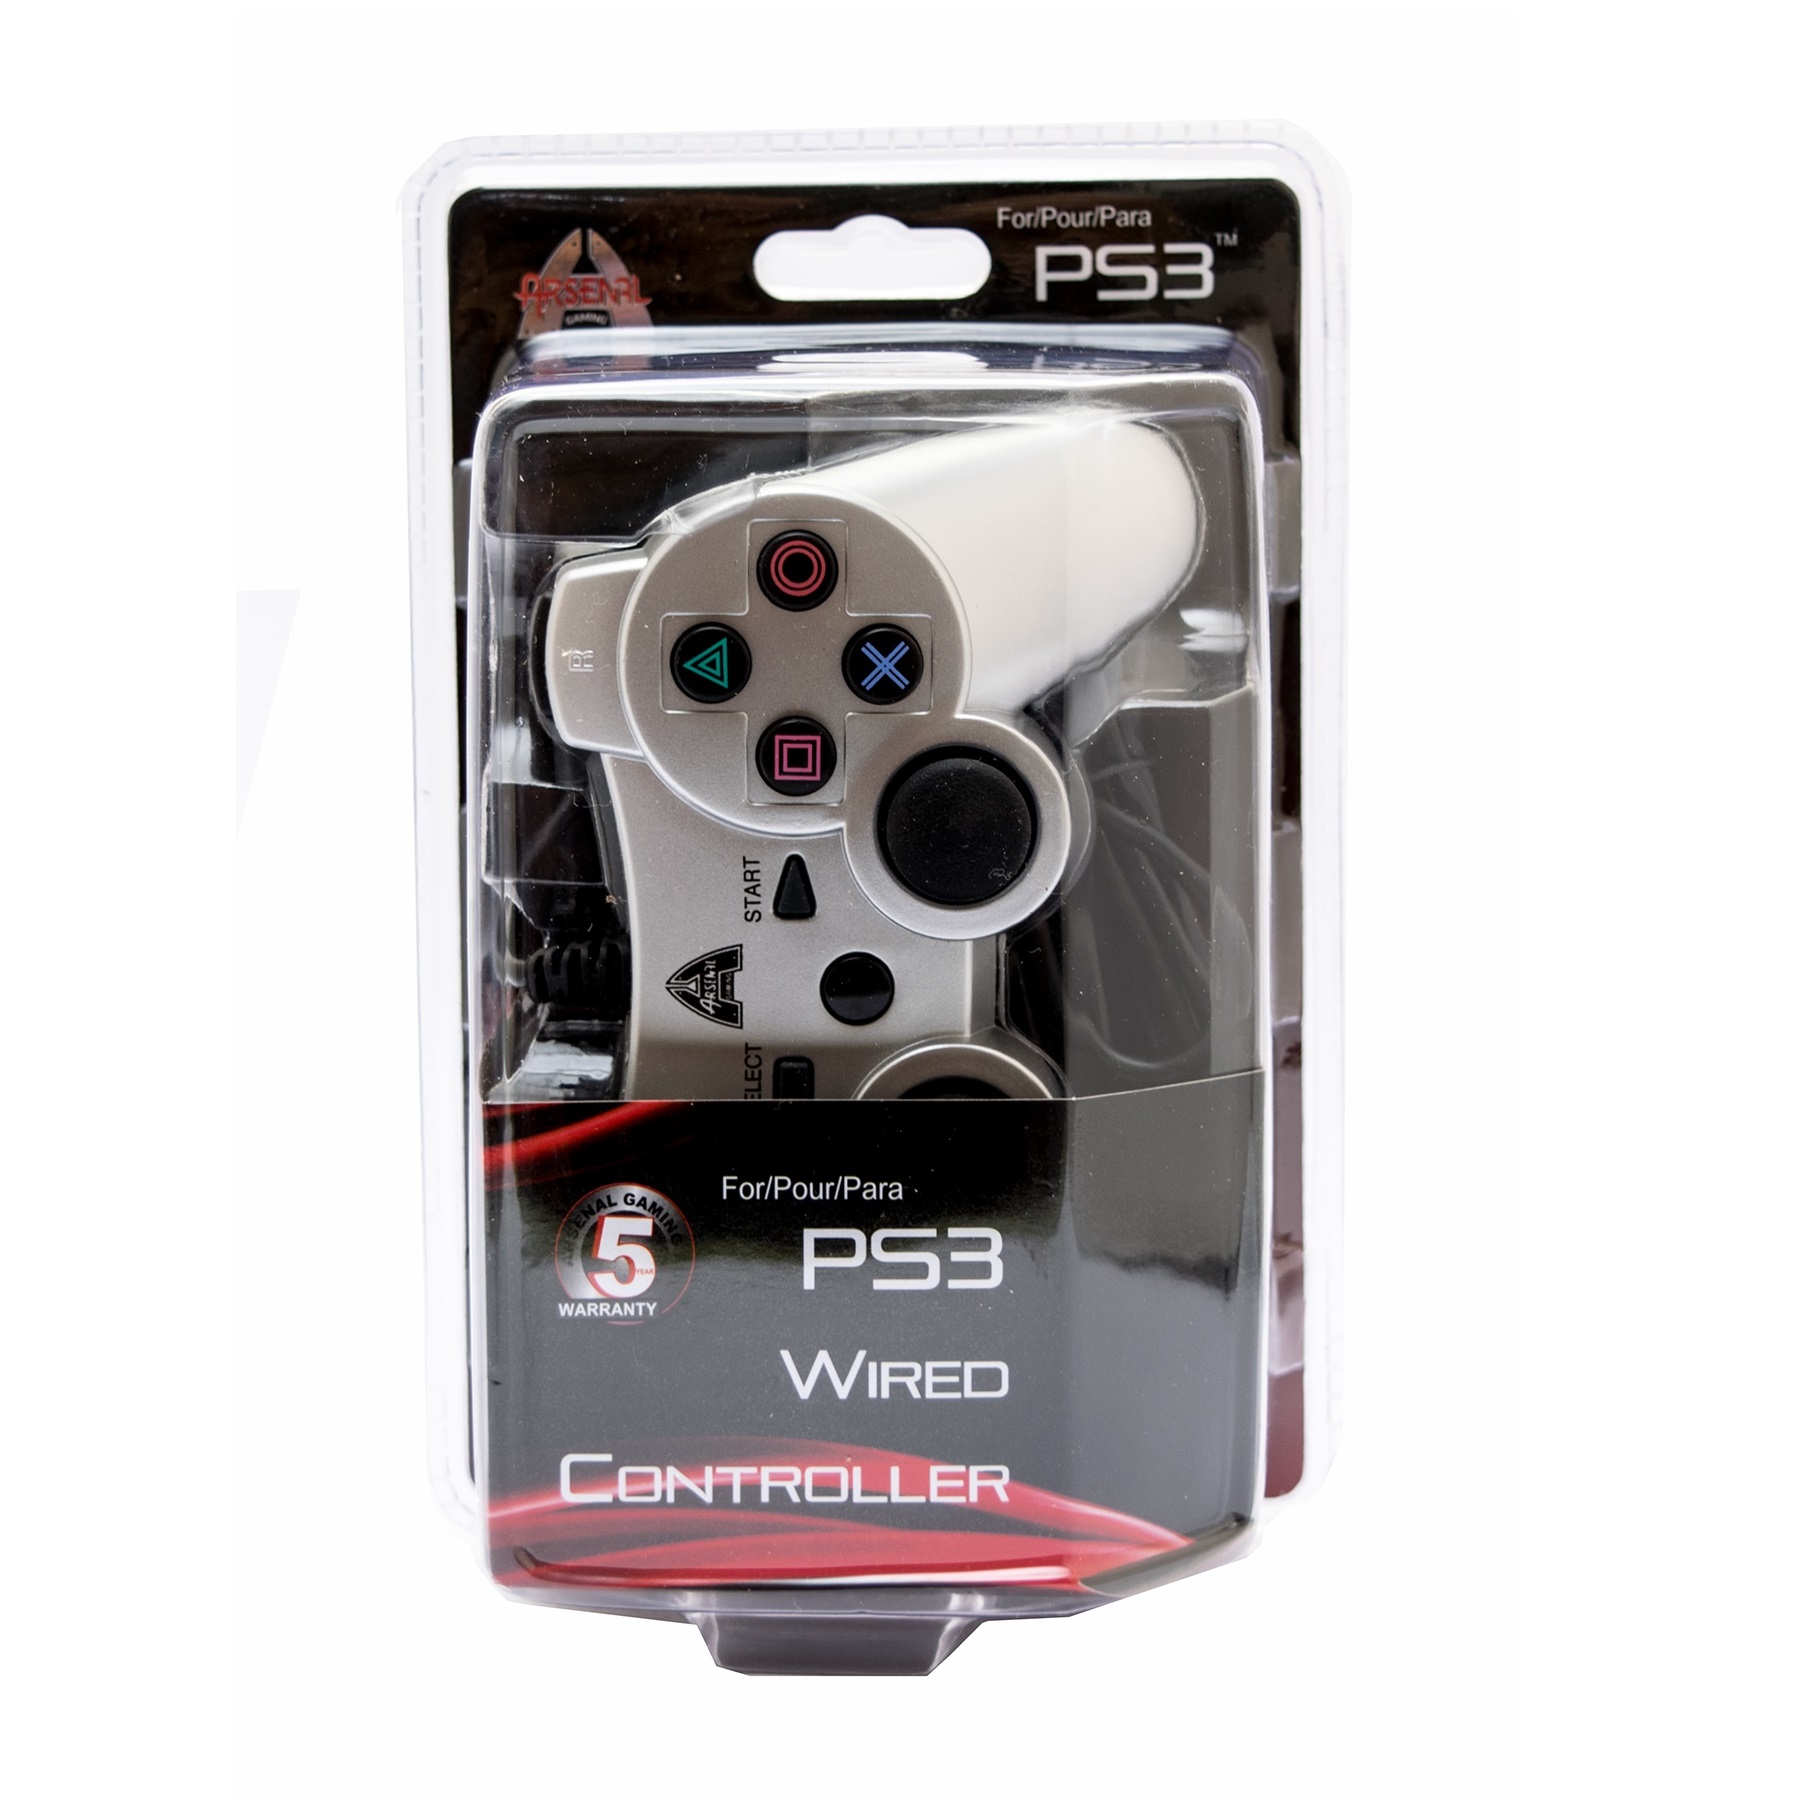 Arsenal Gaming PS3 Wired Controller - Gamepad - wired - silver - for Sony PlayStation 3 - image 2 of 4